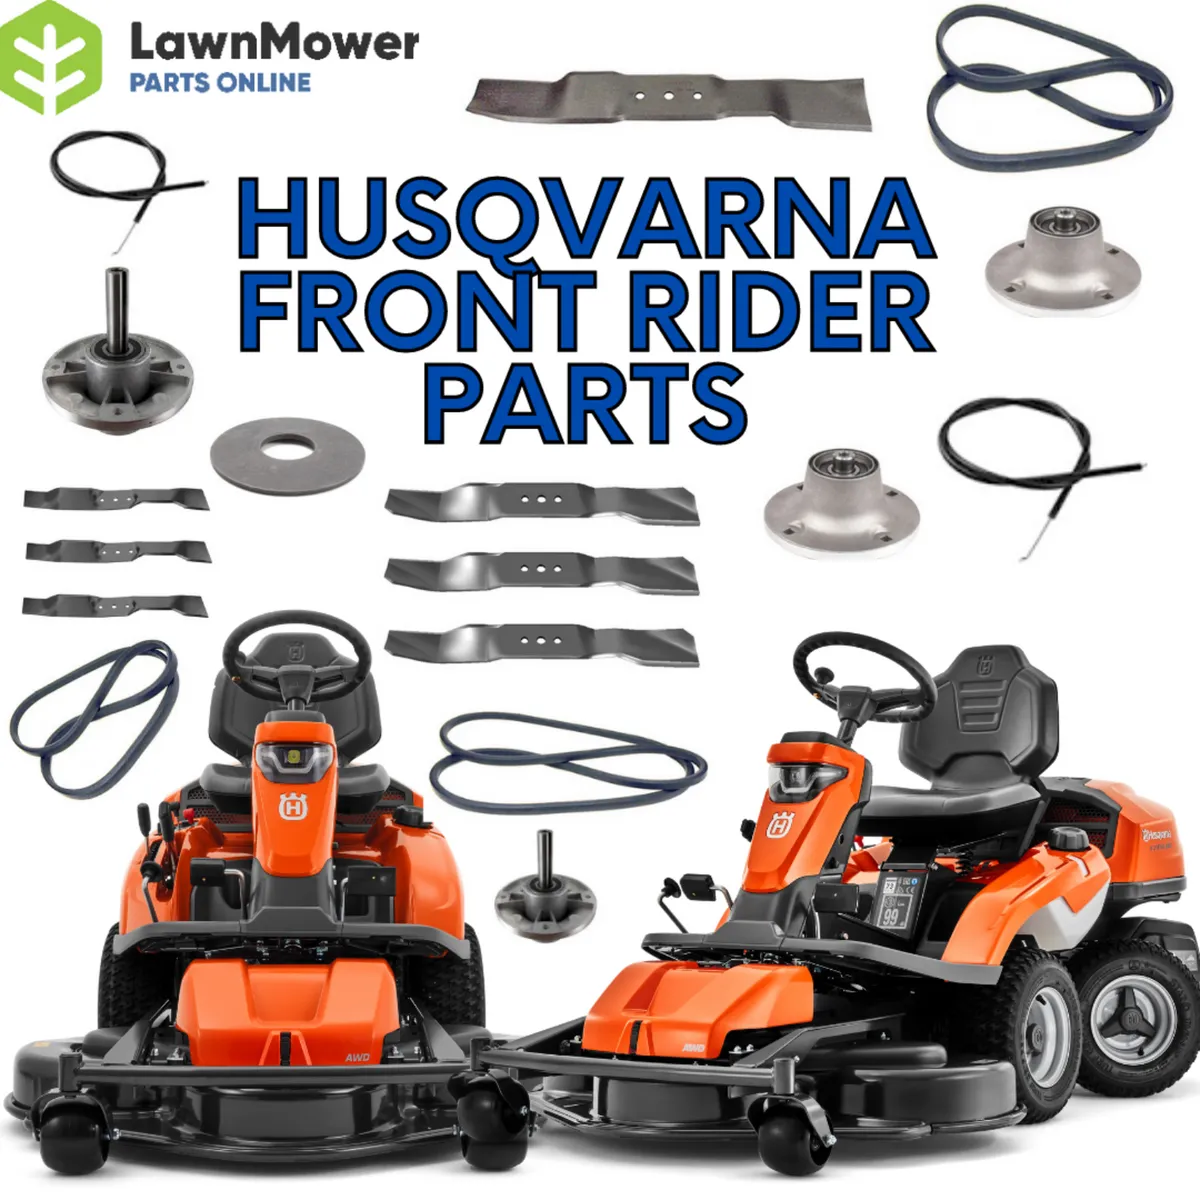 Husqvarna Front Rider Parts - FREE Delivery - Image 1